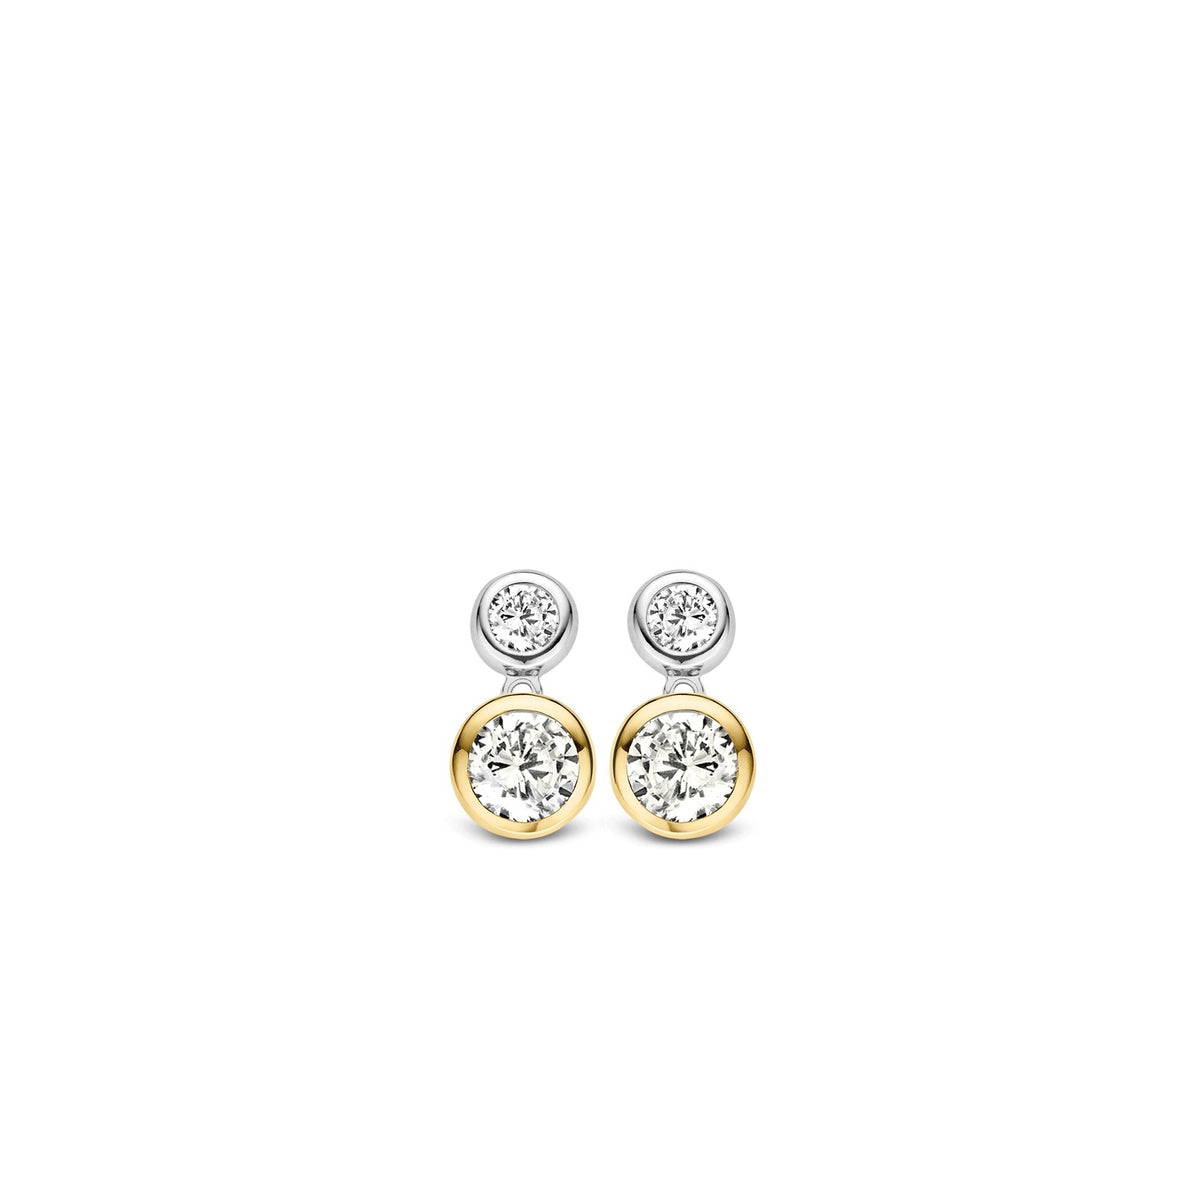 TI SENTO Sterling Silver Two Tone Earrings with Two Bezel Set Cubic Zirconia